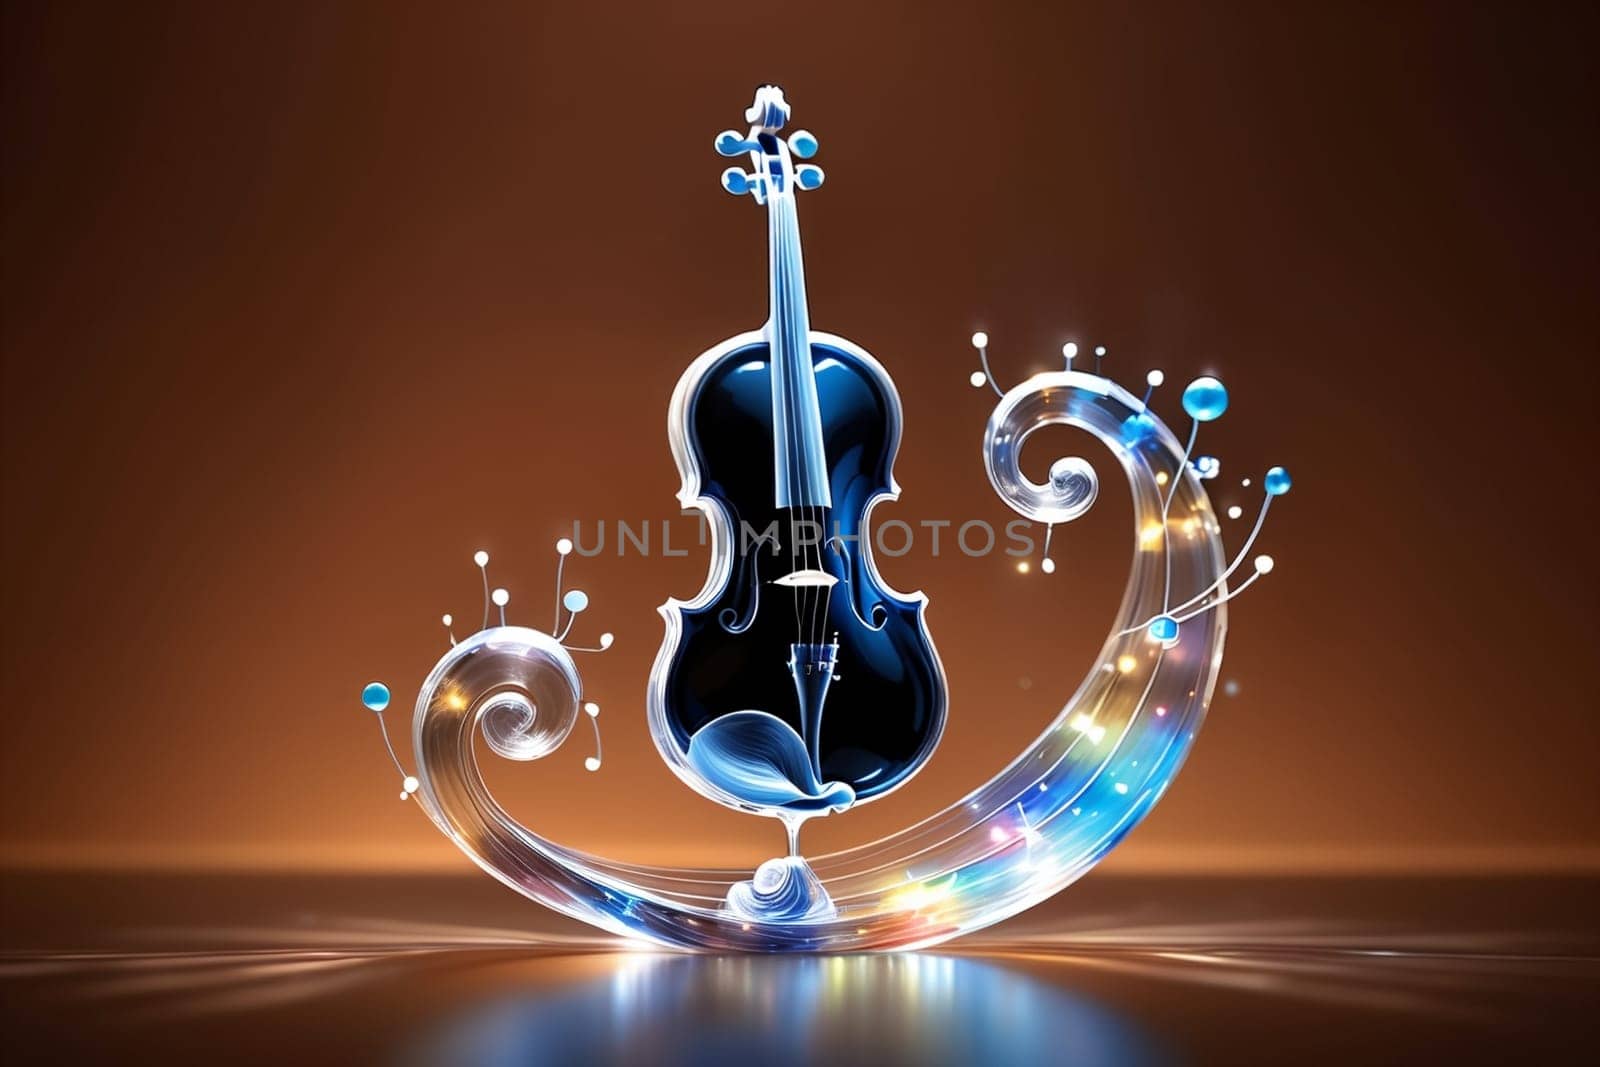 colorful background with musical notes, abstract music background by Rawlik